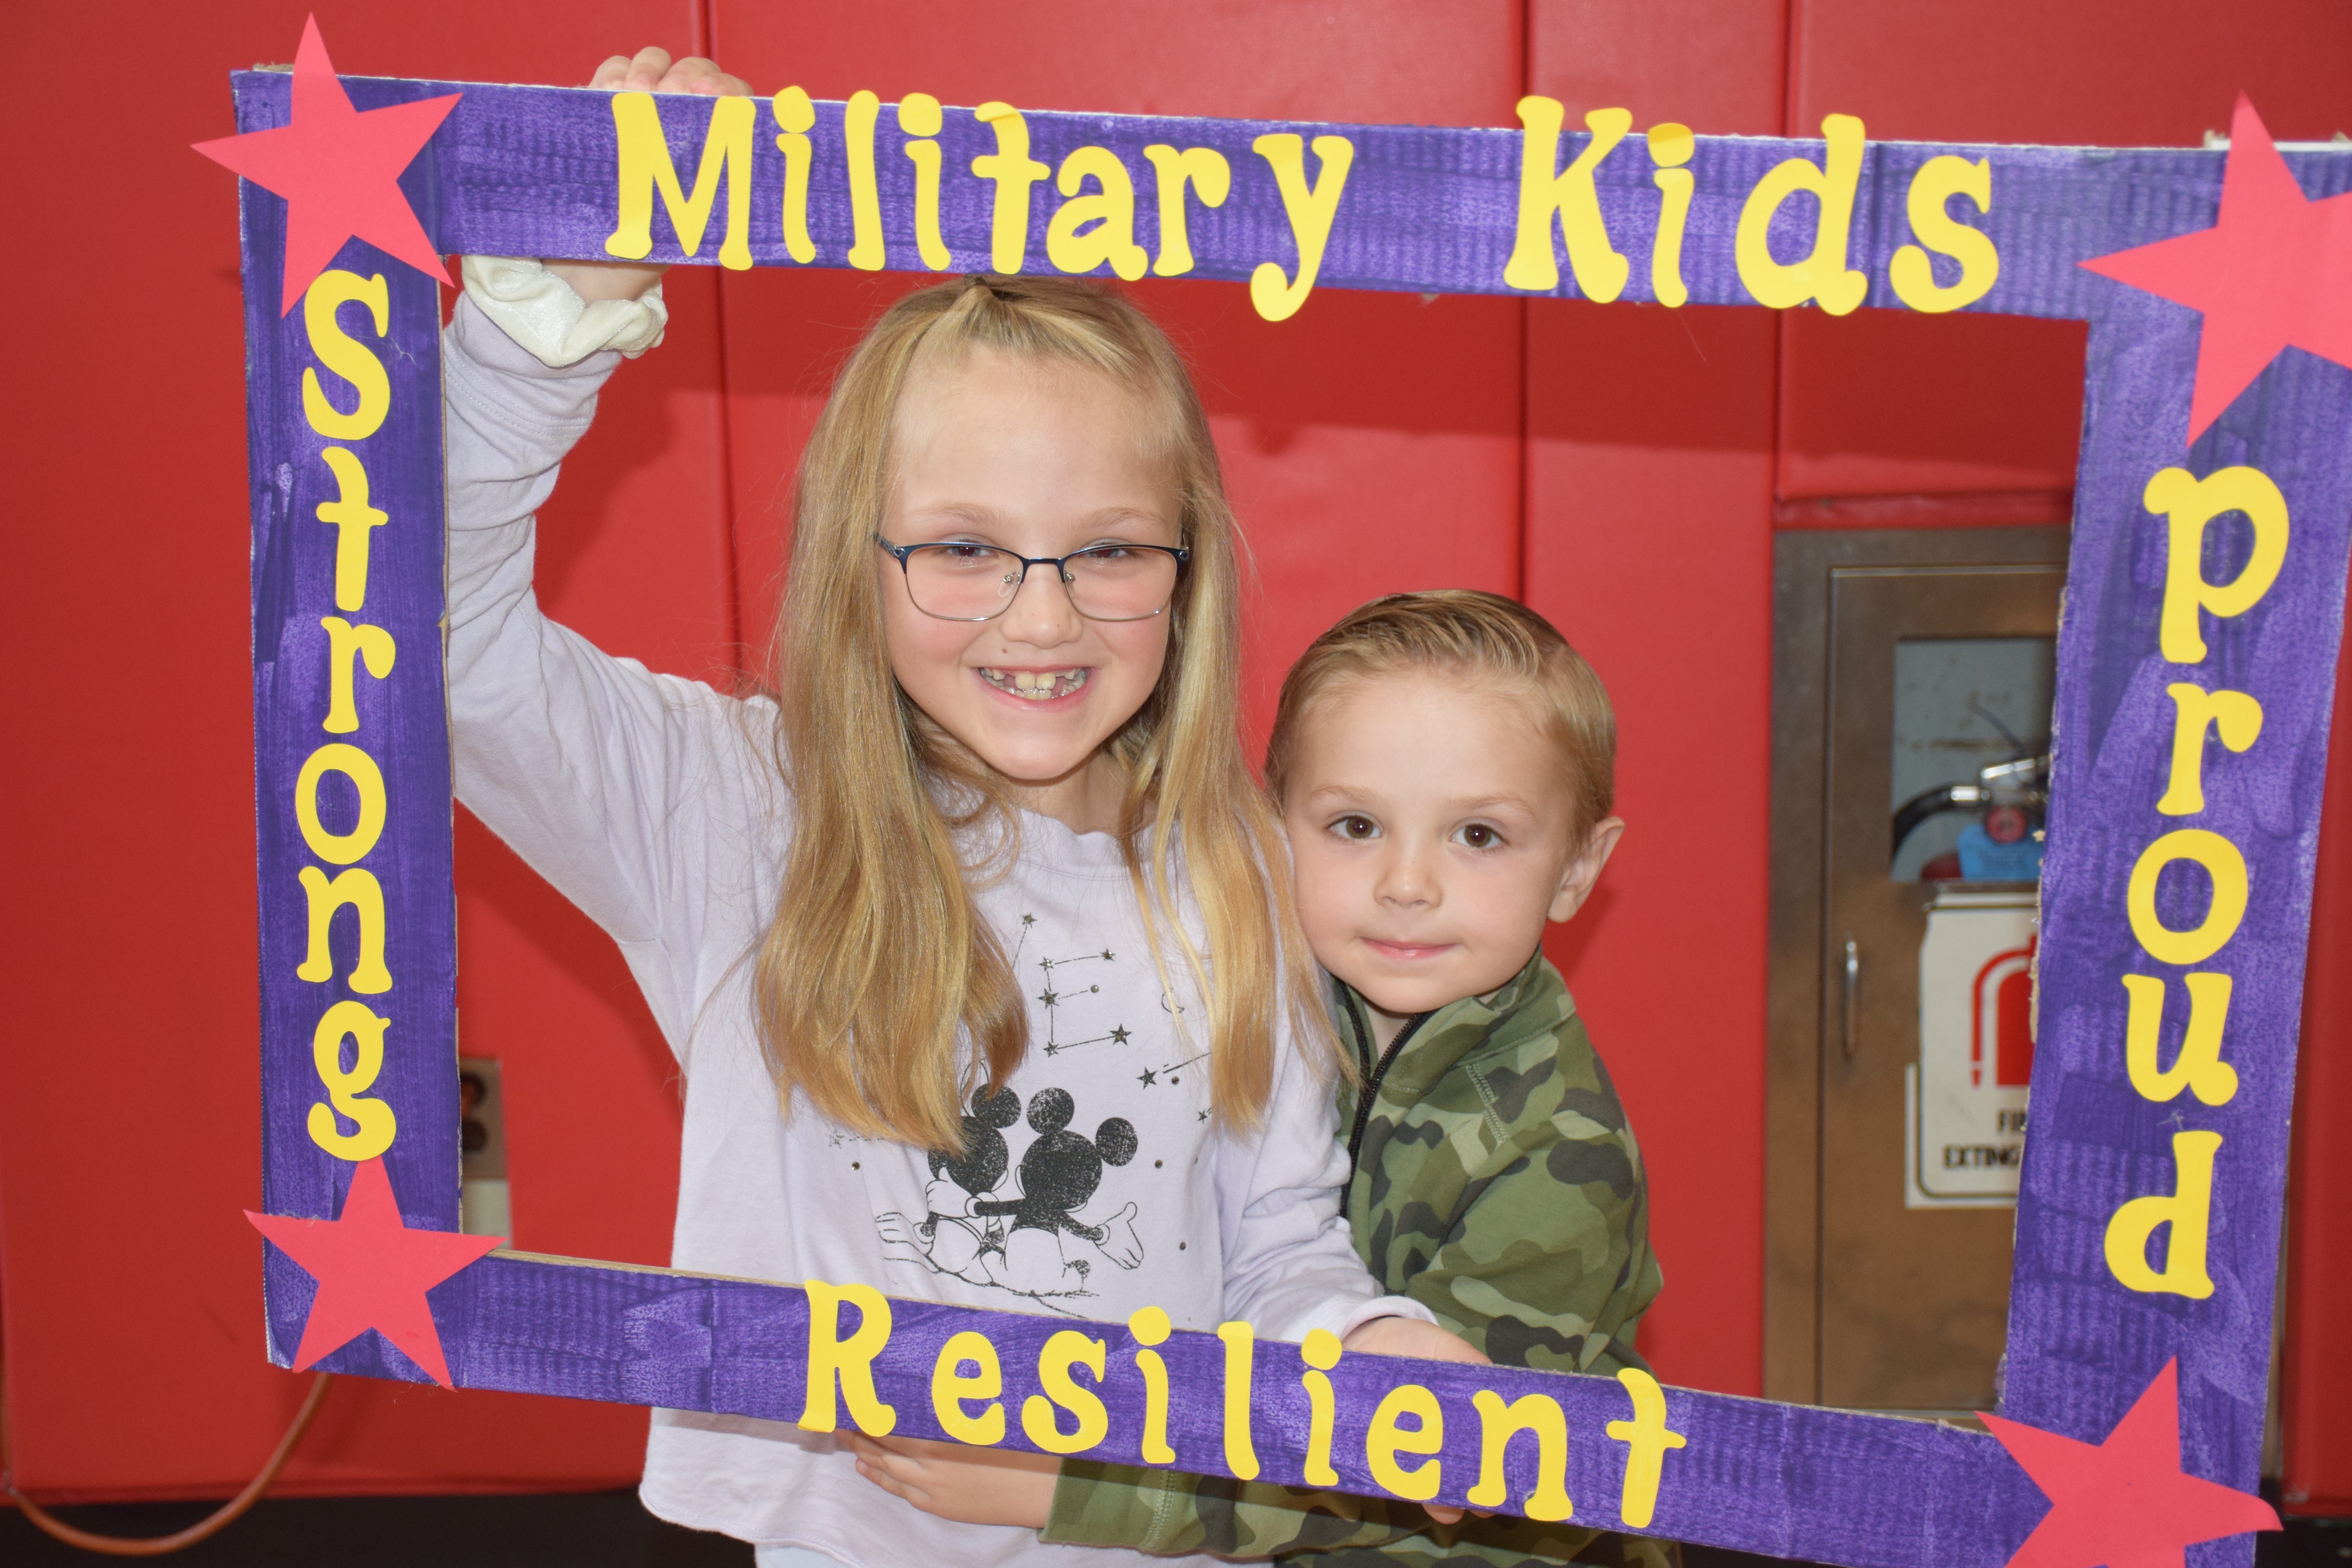 Edward J. Bosti Elementary School students Alexandra Randazzo and Nicholas Randazzo are two of six students honored for their strength, resiliency and pride during a Purple Up assembly.